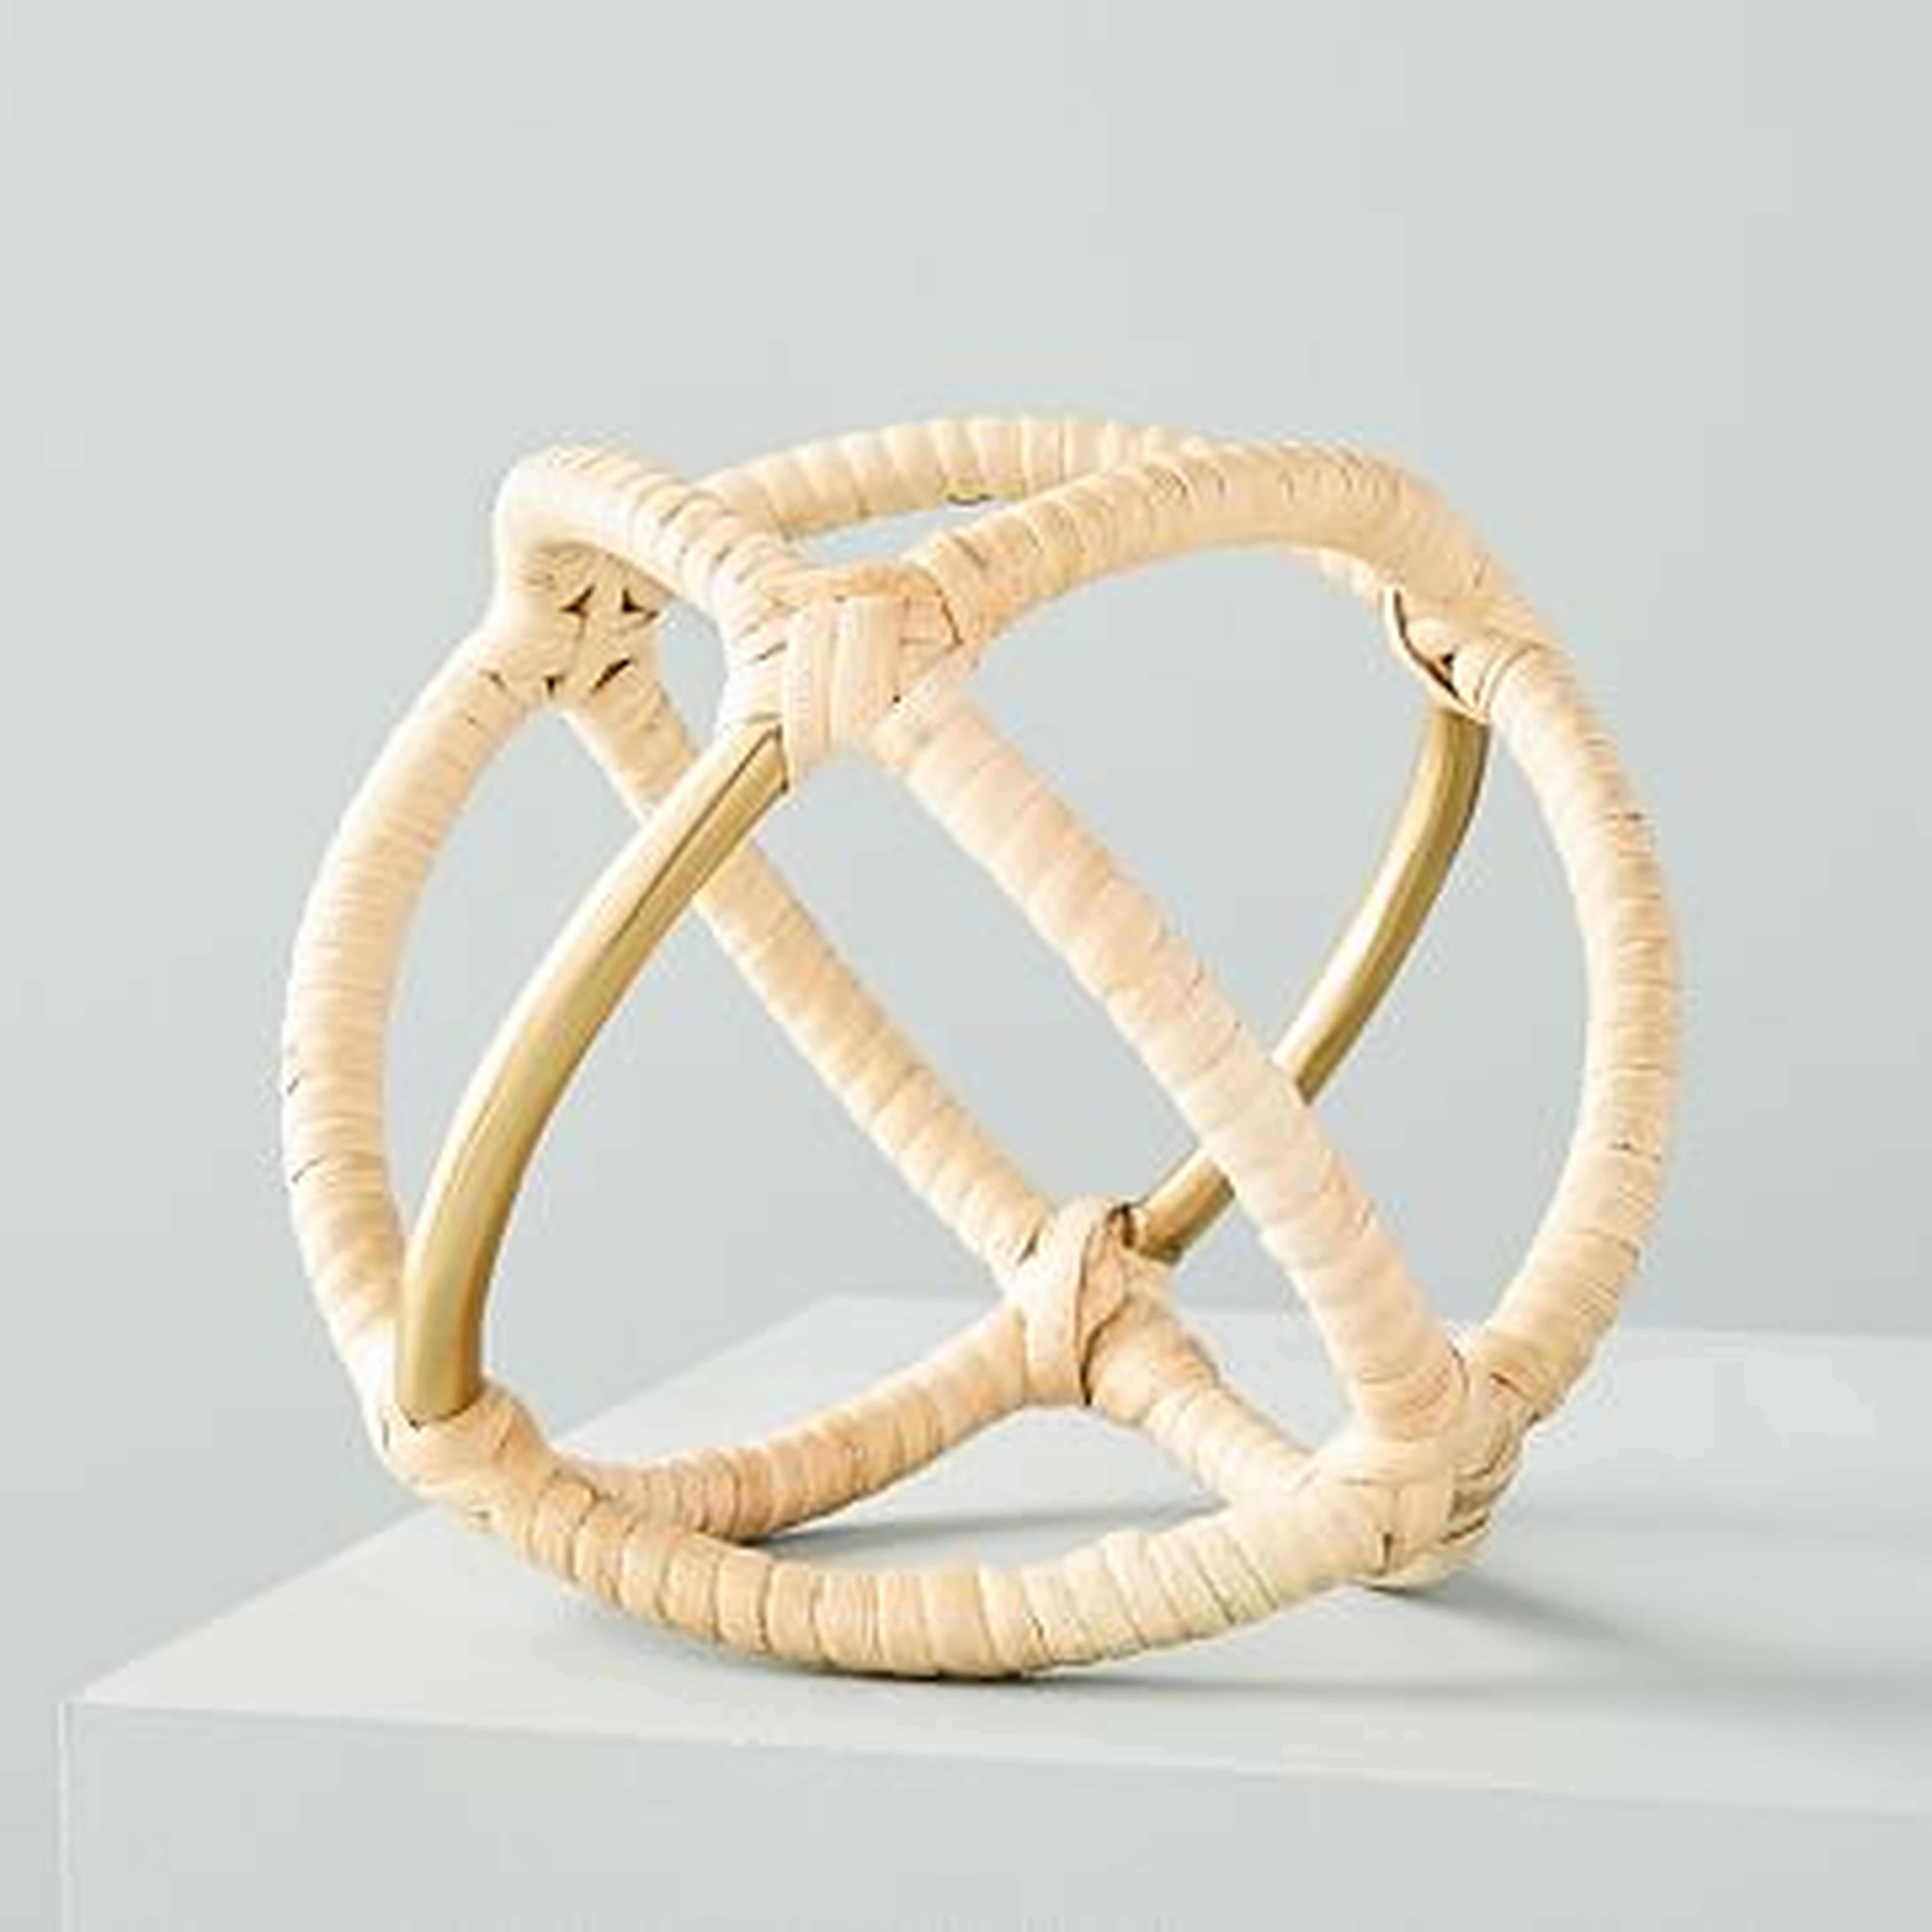 Rattan Wrapped Object - West Elm